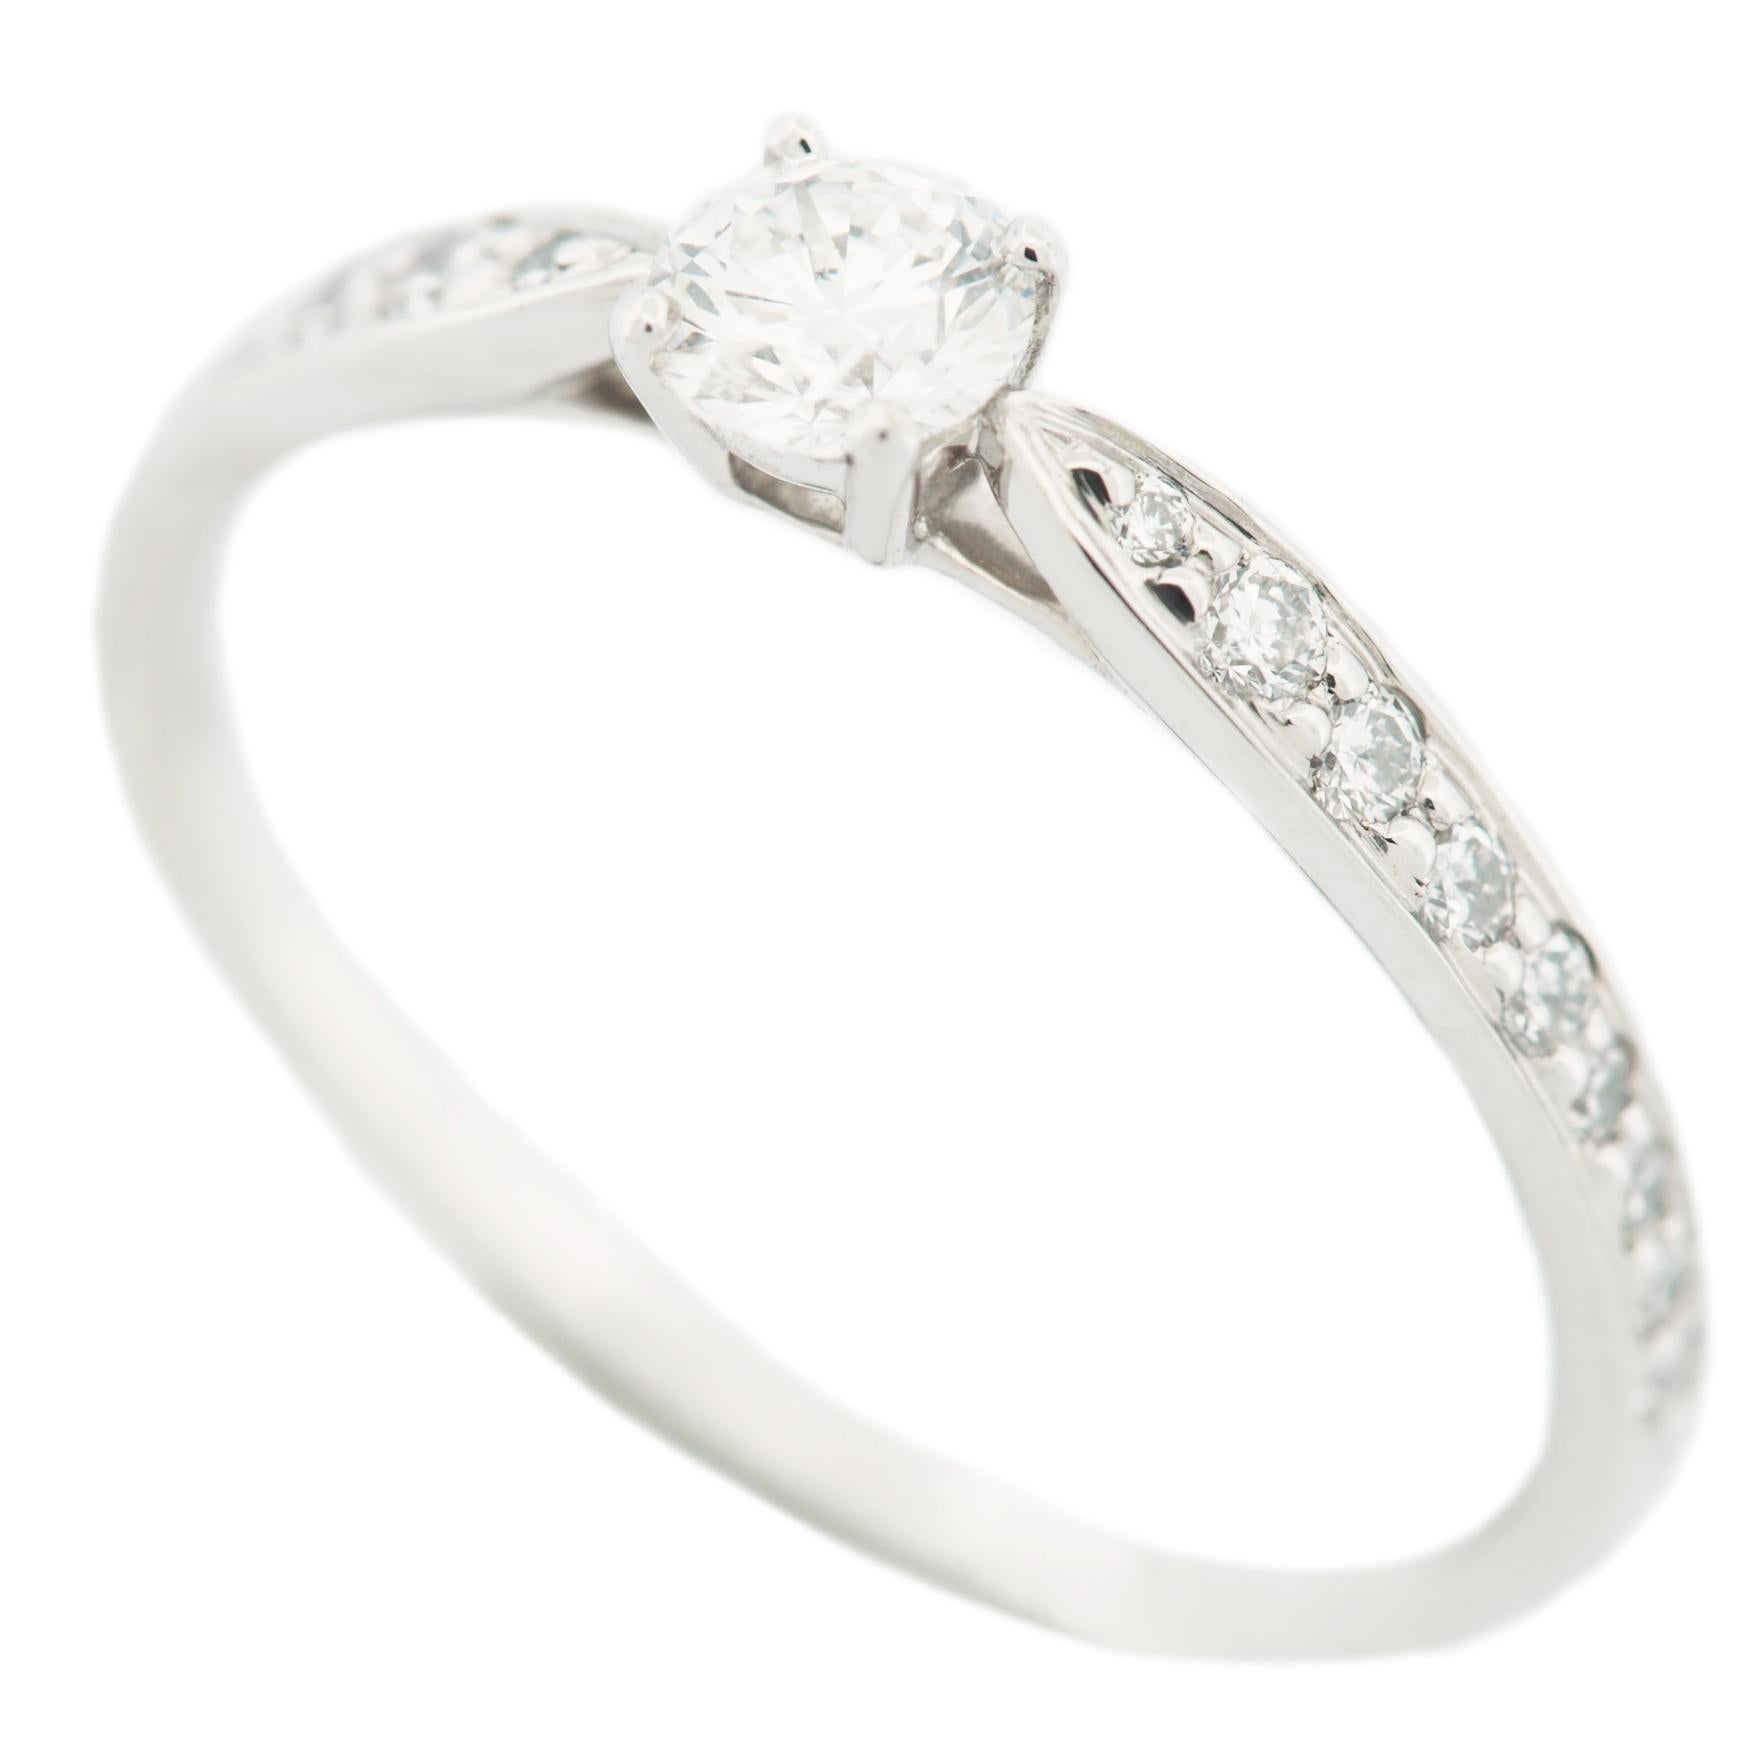 Item: Tiffany Harmony Solitaire Diamond Ring 
Stones: Diamond / 0.23ct (center stone) with 18 pave diamonds (approx. 0.11ct)
Color: ---
Clarity:---
Polish: ---
Symmetry: ---
Fluorescence: ---
Metal: Platinum 950
Ring Size: SIZE 5.75 UK SIZE K